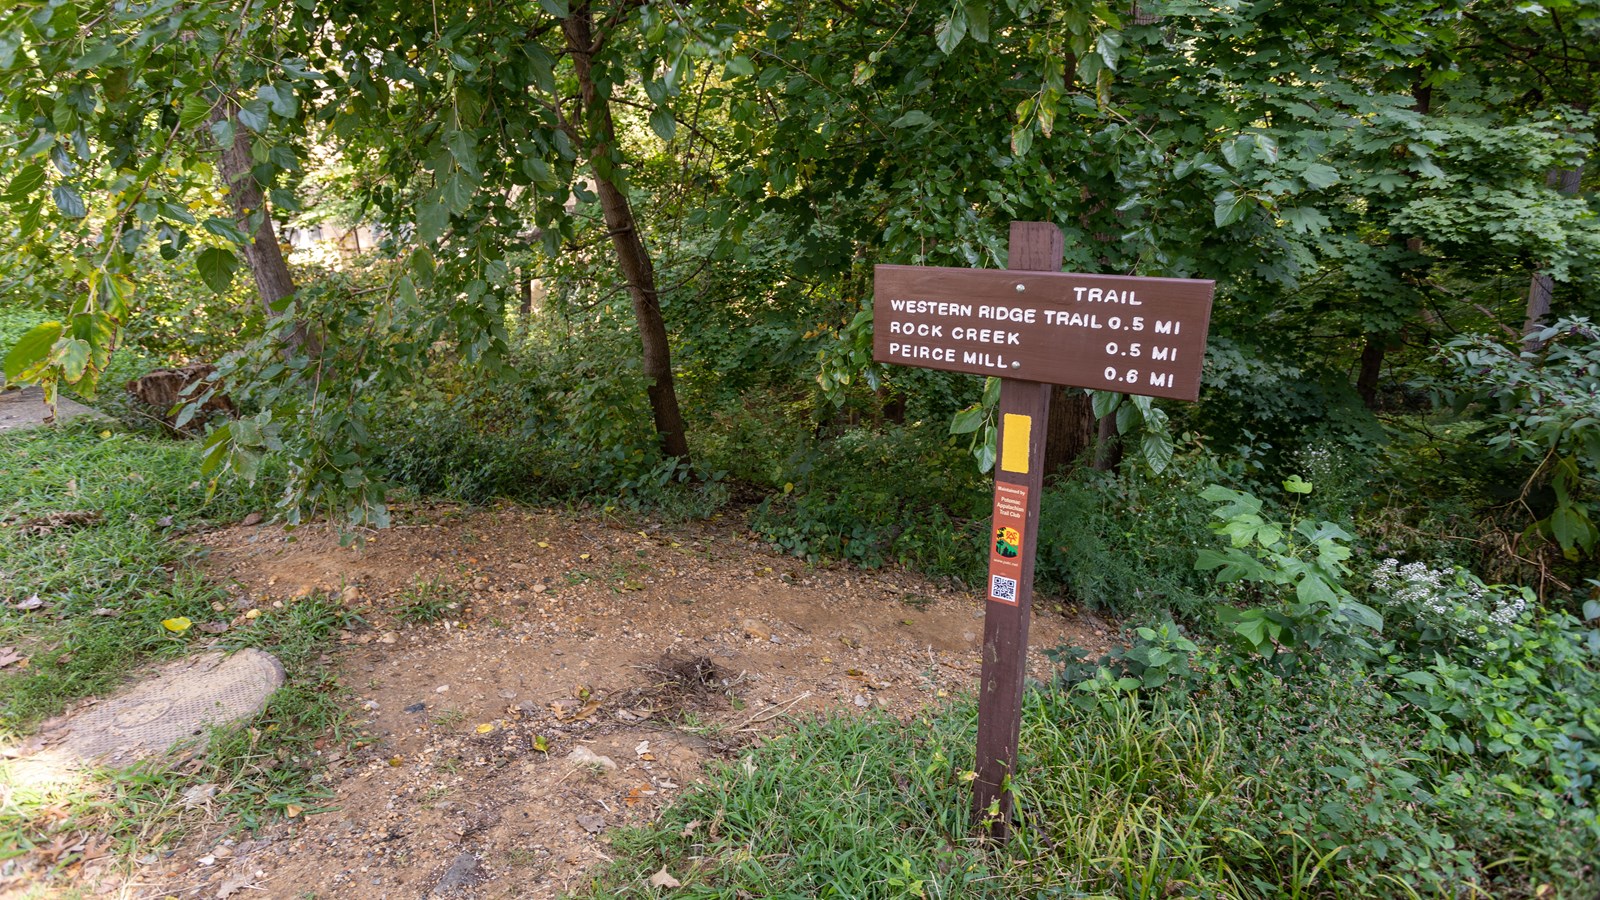 A trail marker sign in front of a trail surrounded by woods